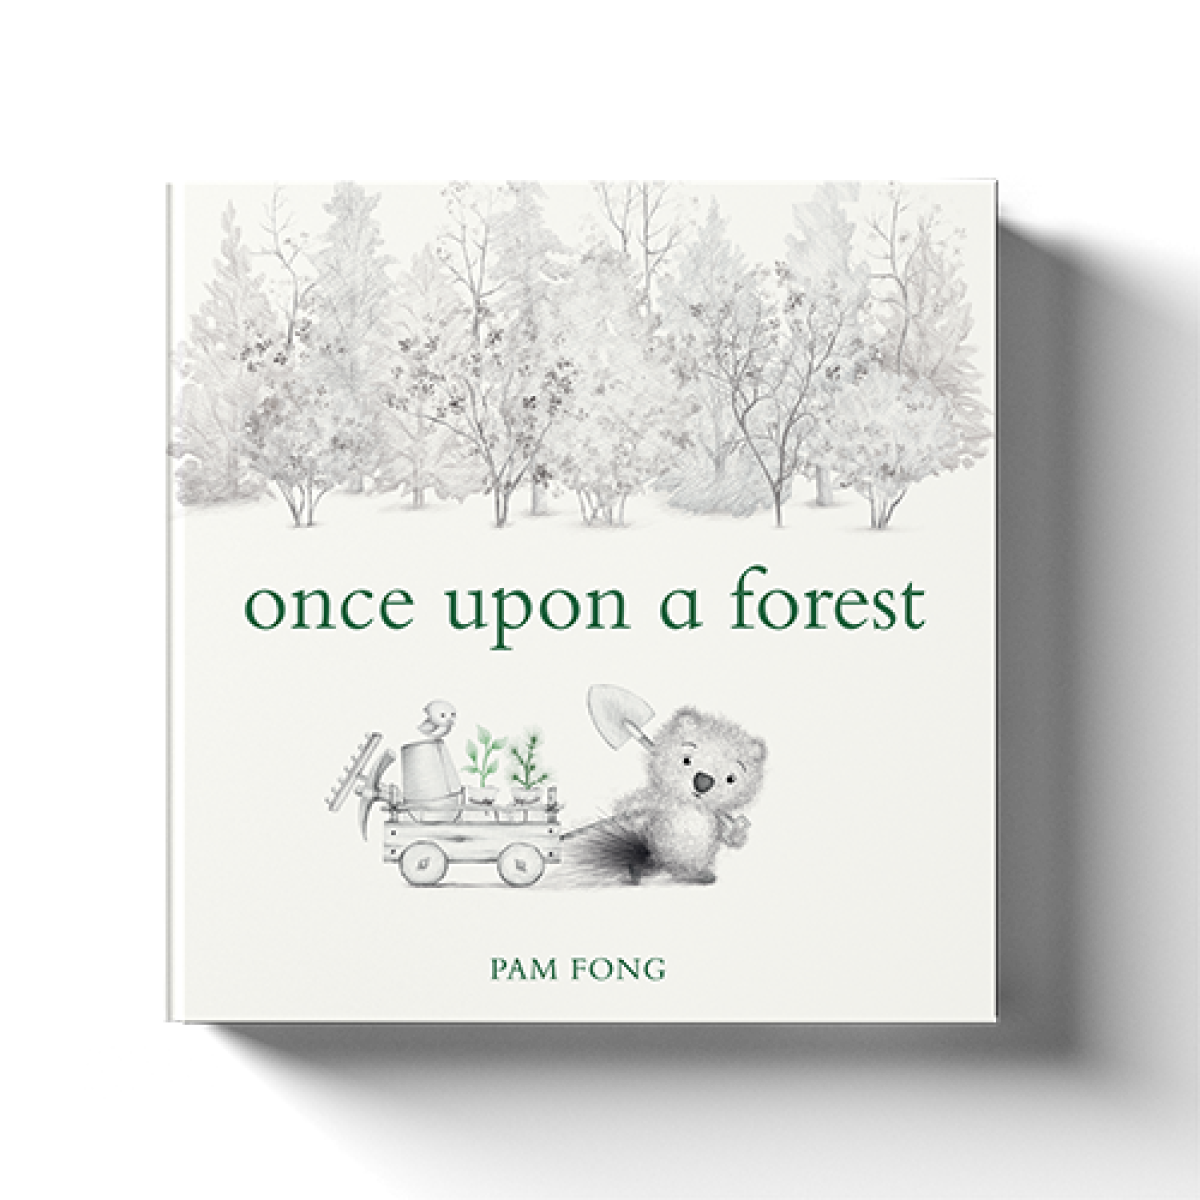 The cover of “Once Upon a Forest” by Pam Fong.